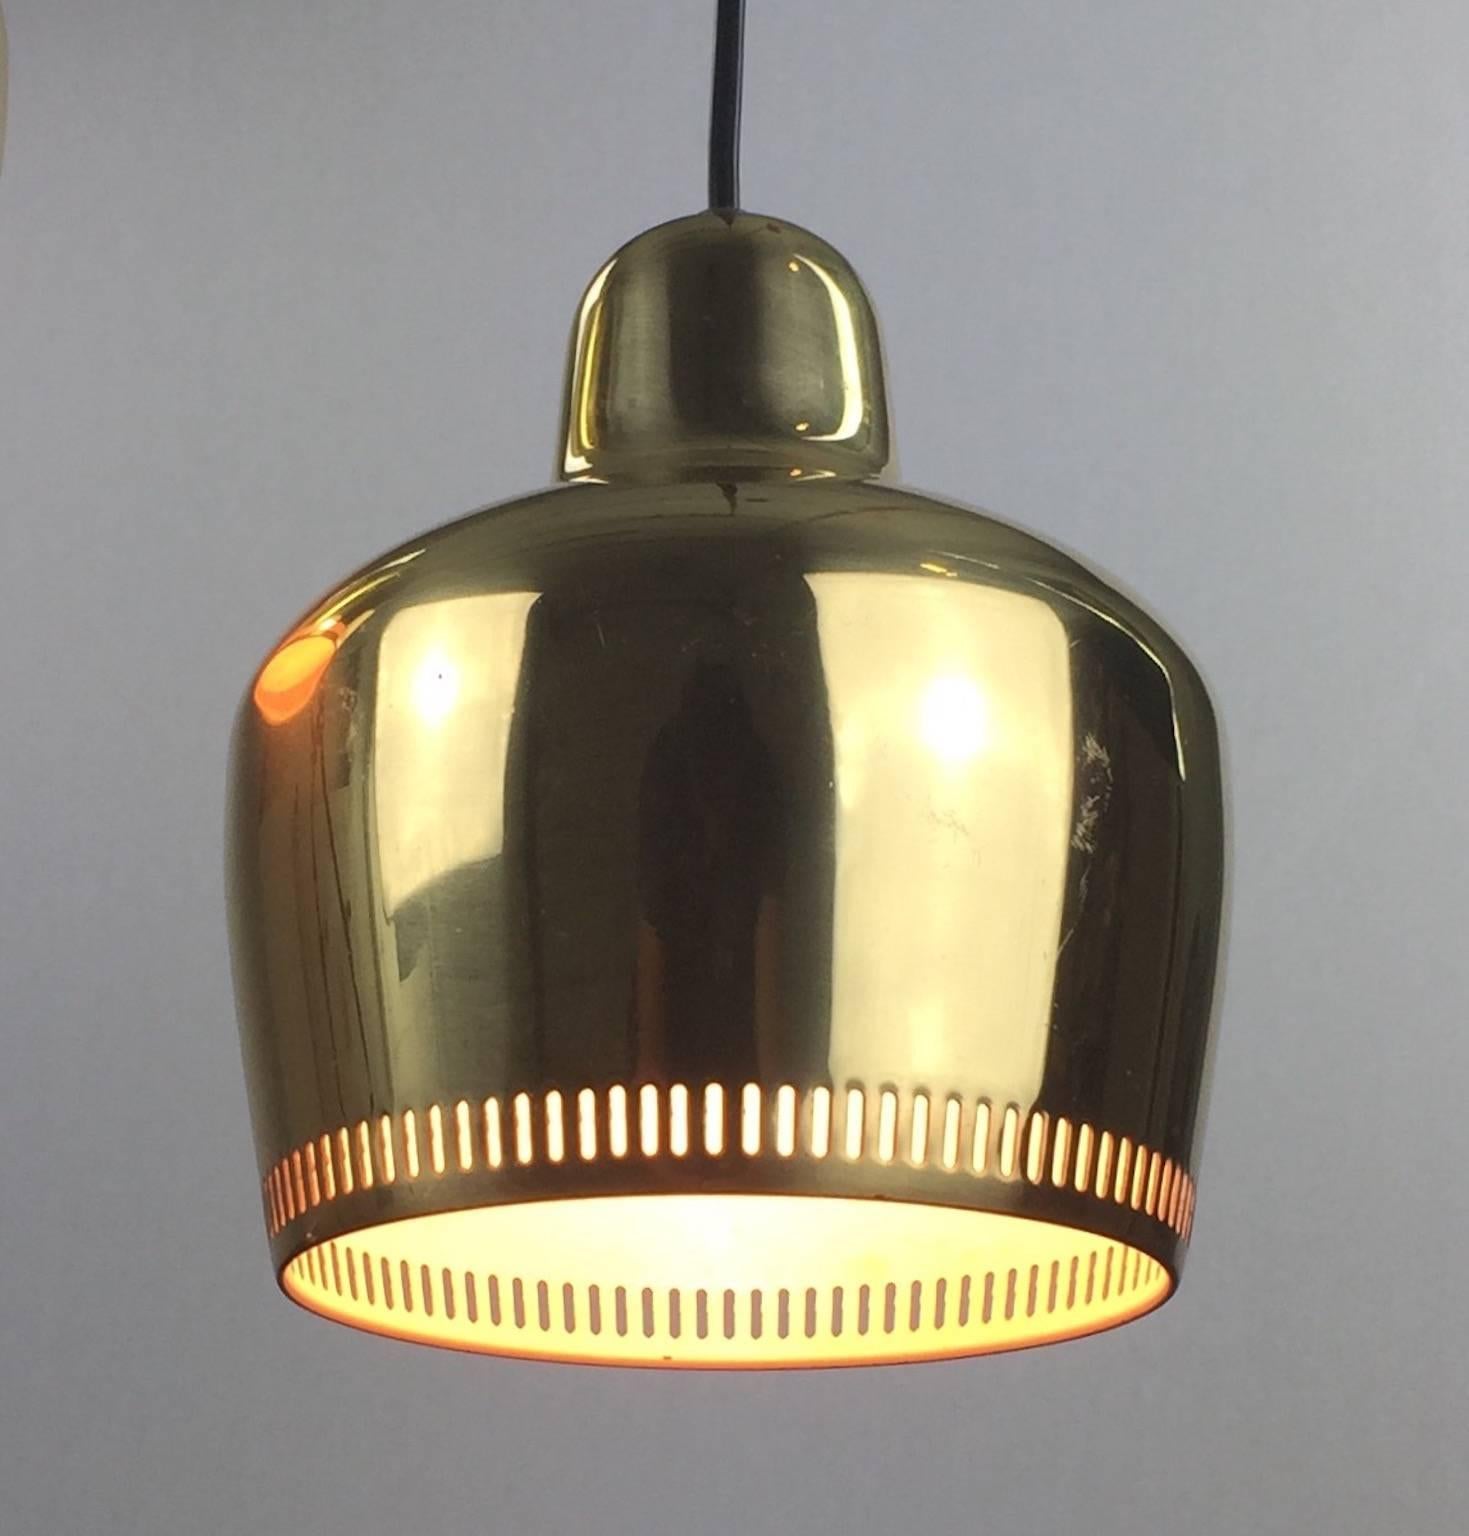 In 1937 Alvar Aalto designed the A330S pendant for the Savoy restuarant. 

The regular outer layer is brass, chrome, white or black. 

Produced by Artek in high built quality.

A real collectors item.

Condition: Nicely patinated with few age